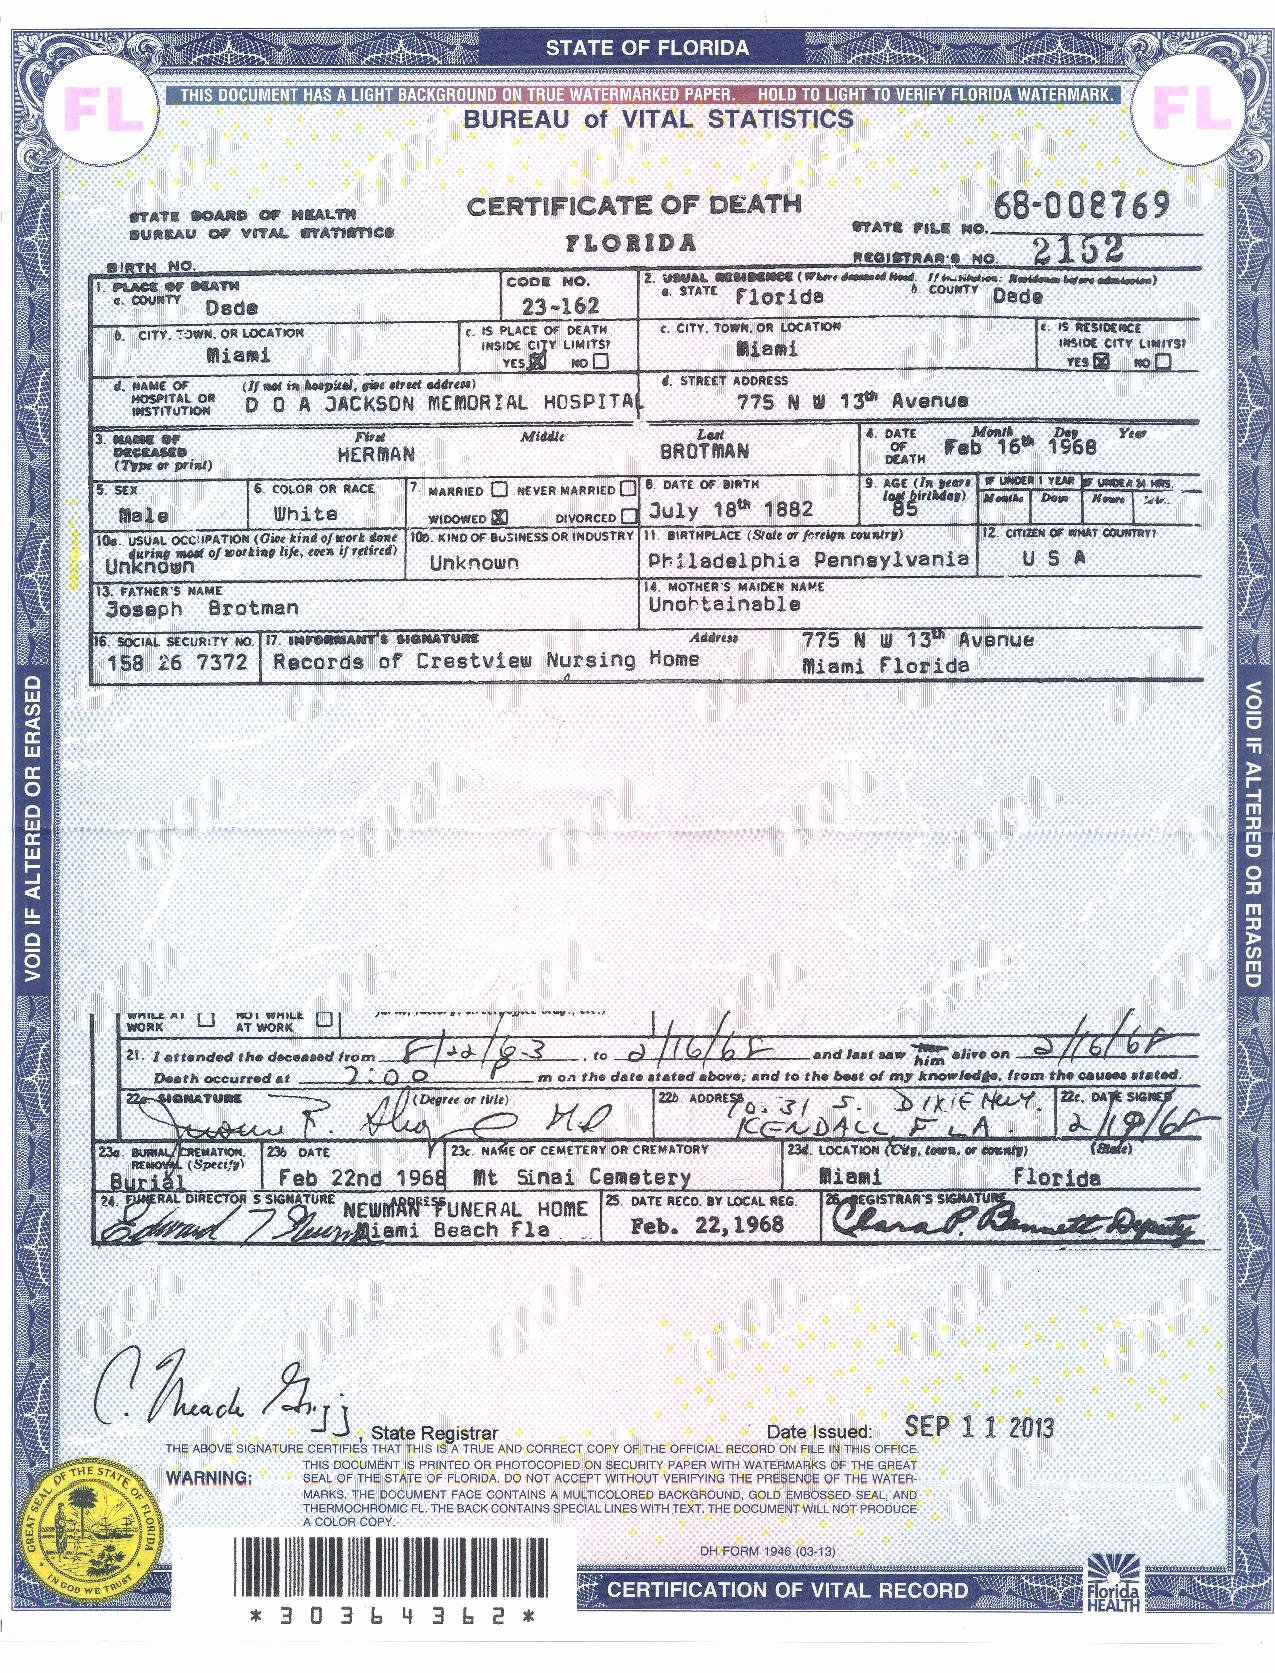 Florida Death Certificate Sample Unique 301 Moved Permanently